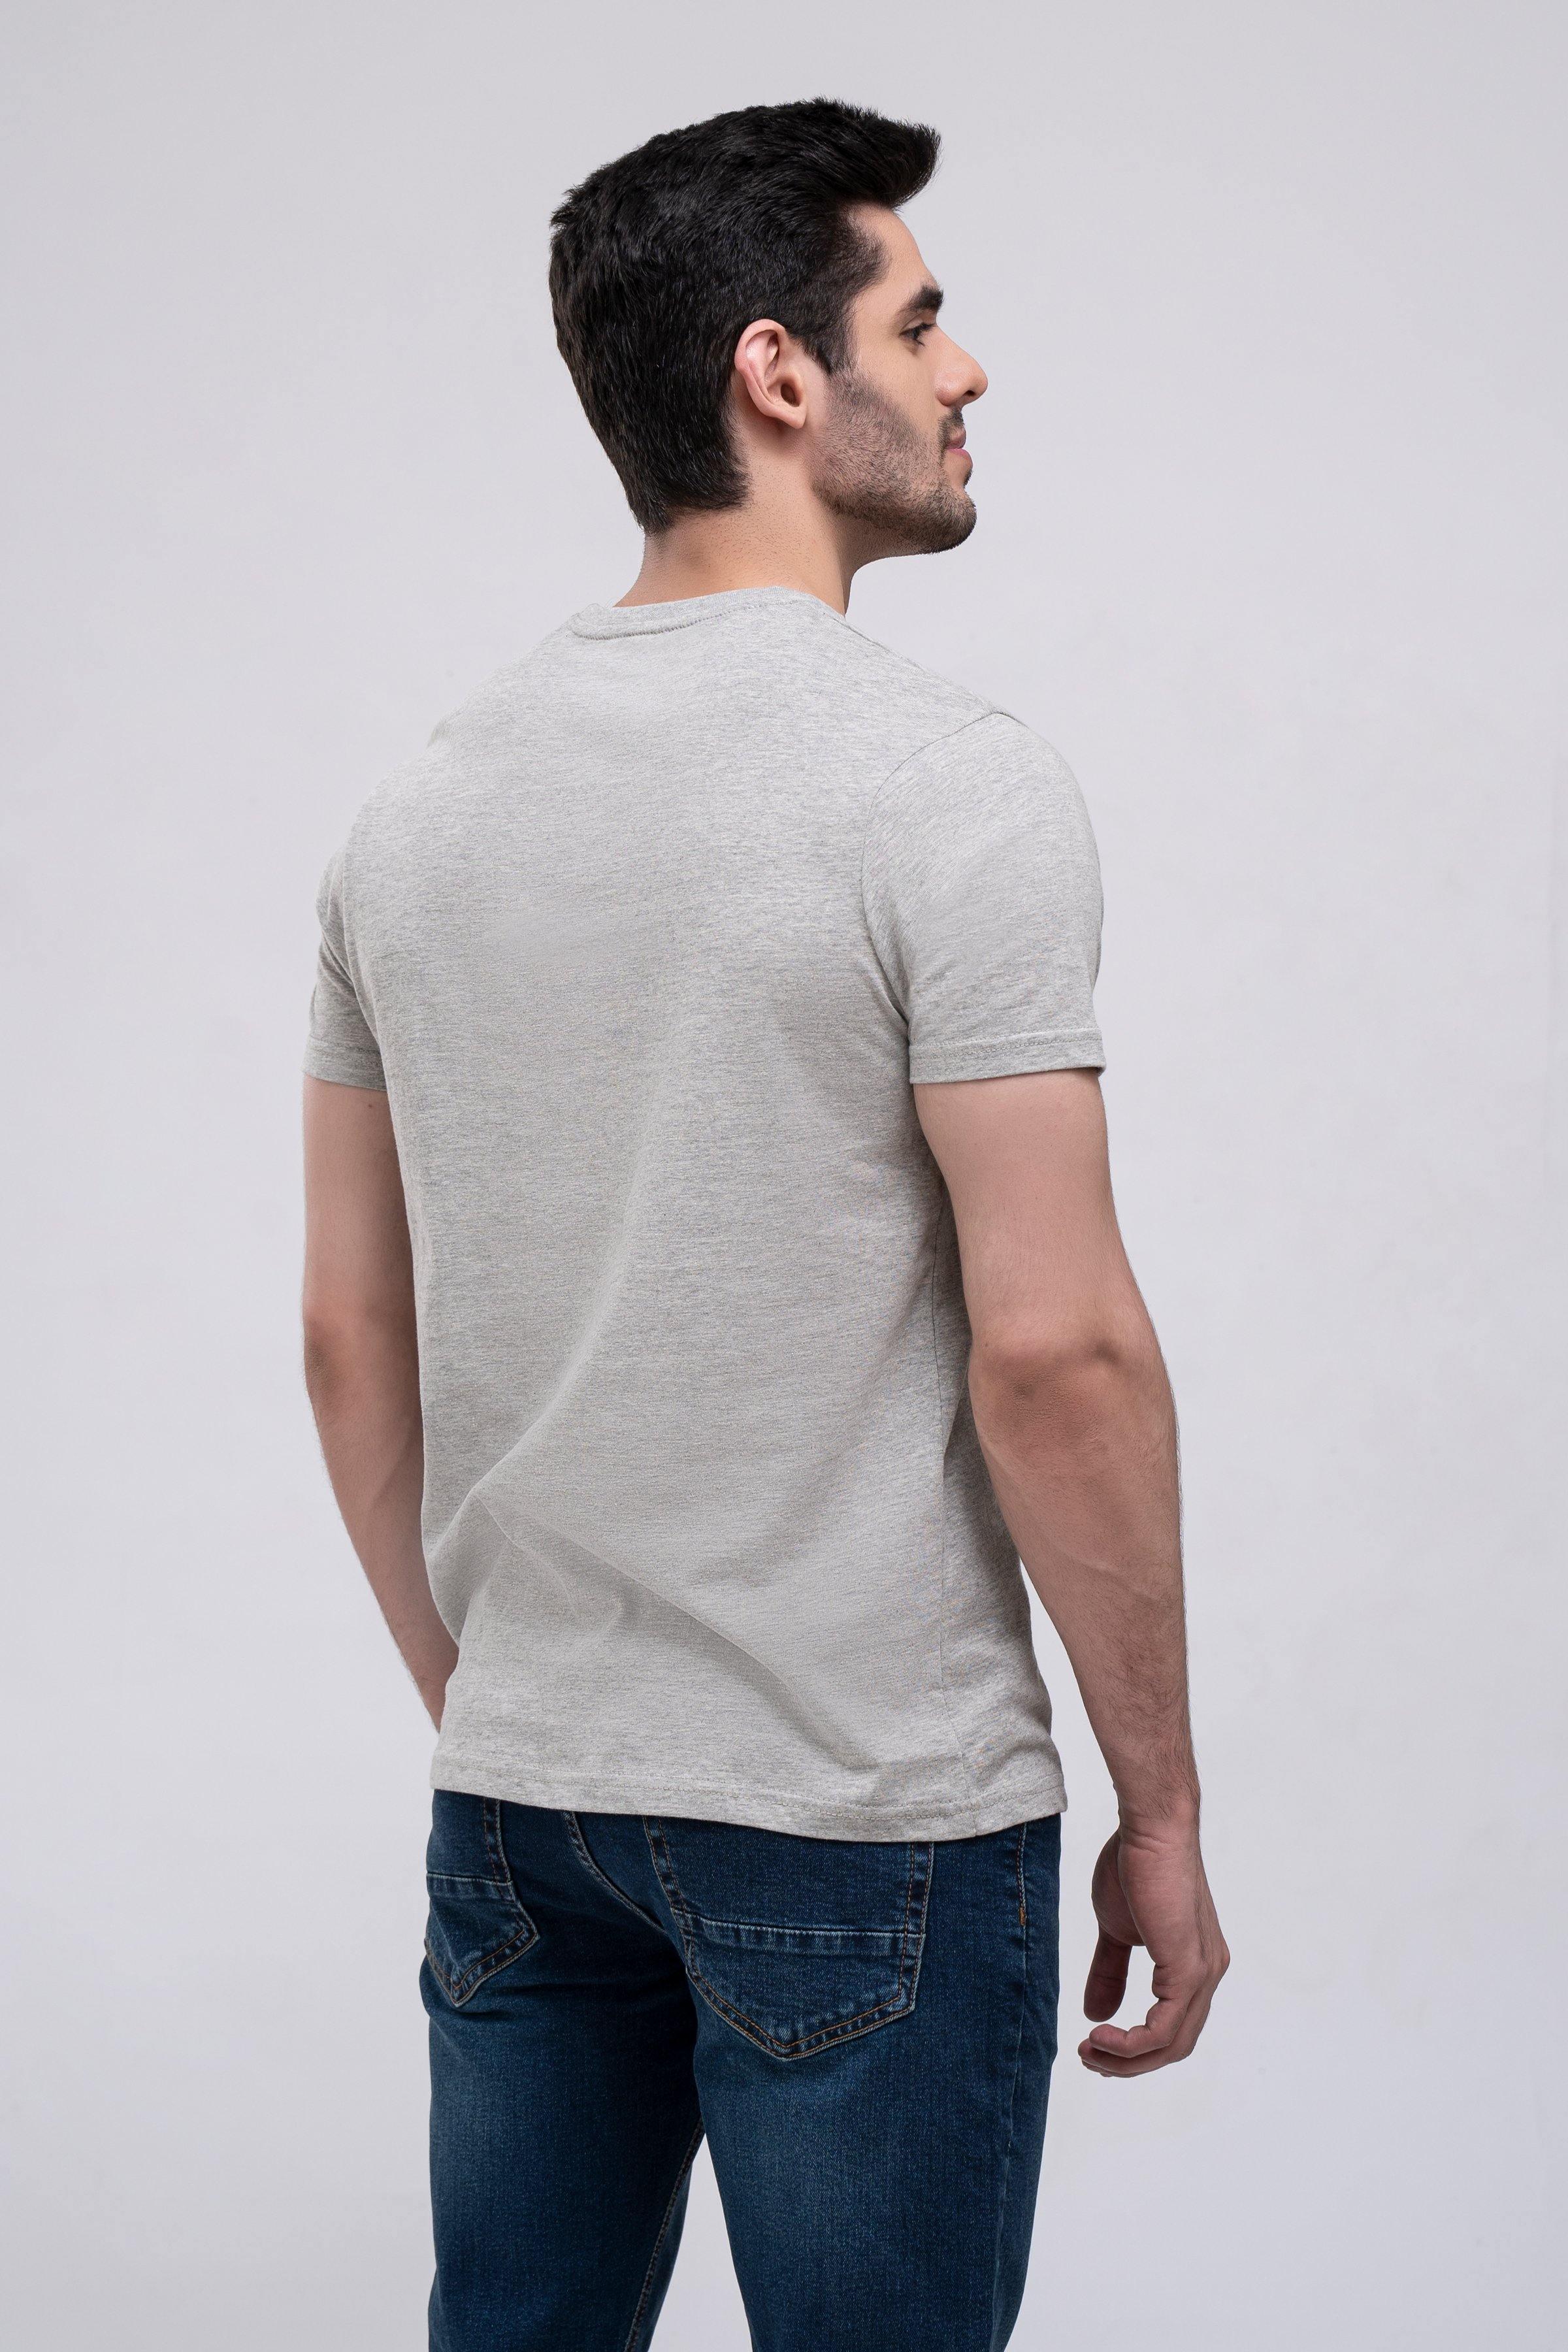 T SHIRT CREW NECK HYDER GREY at Charcoal Clothing